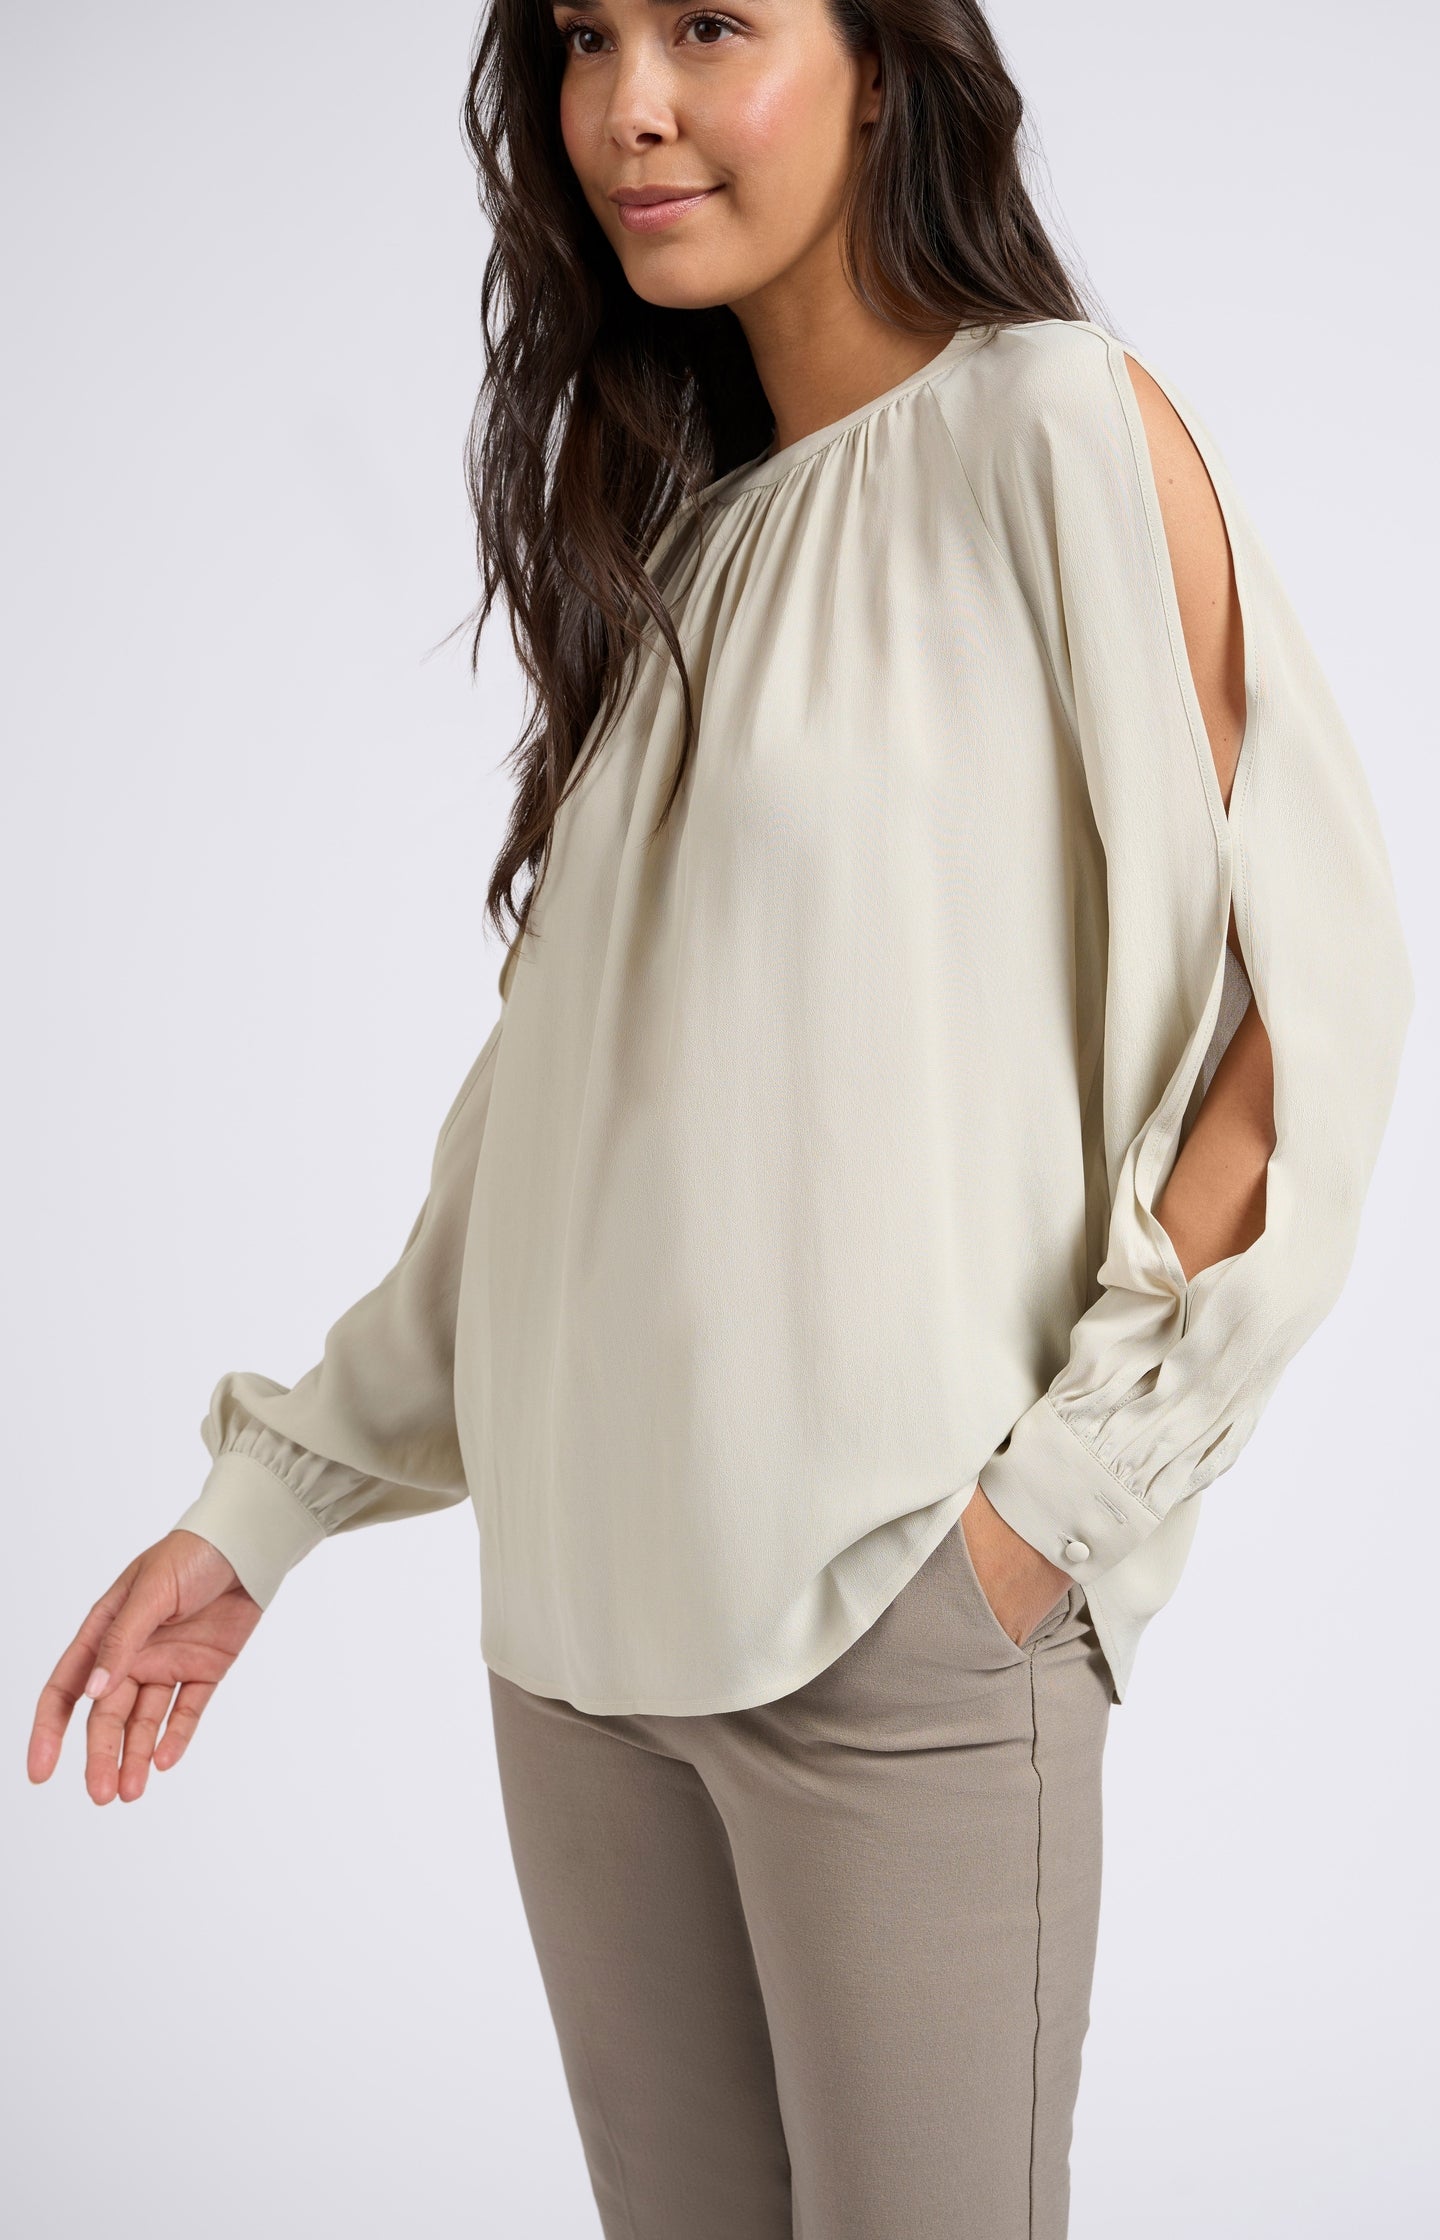 Woven top with long balloon sleeves